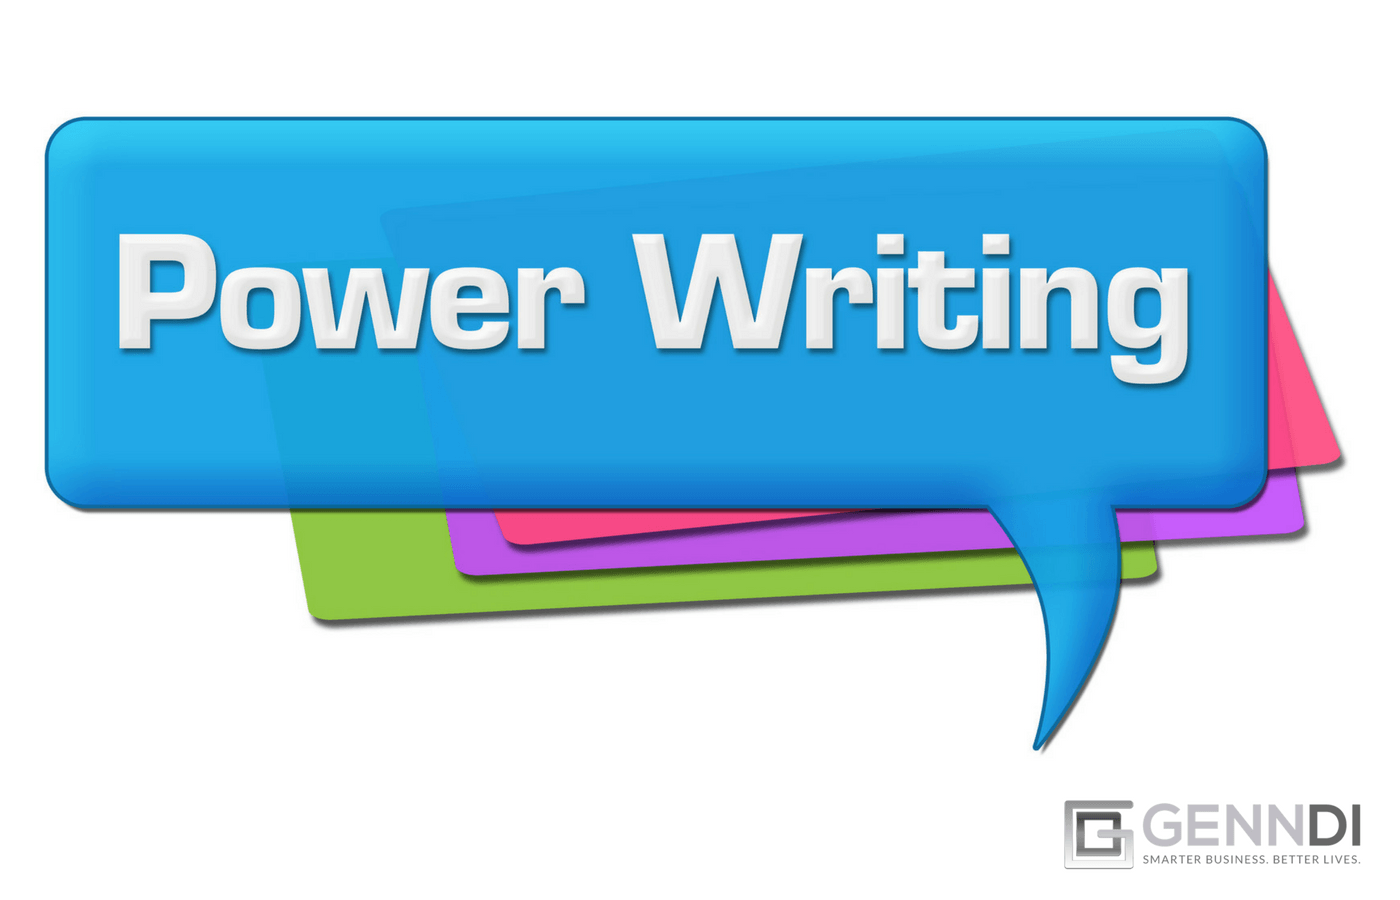 Use this formula to write quickly and effectively